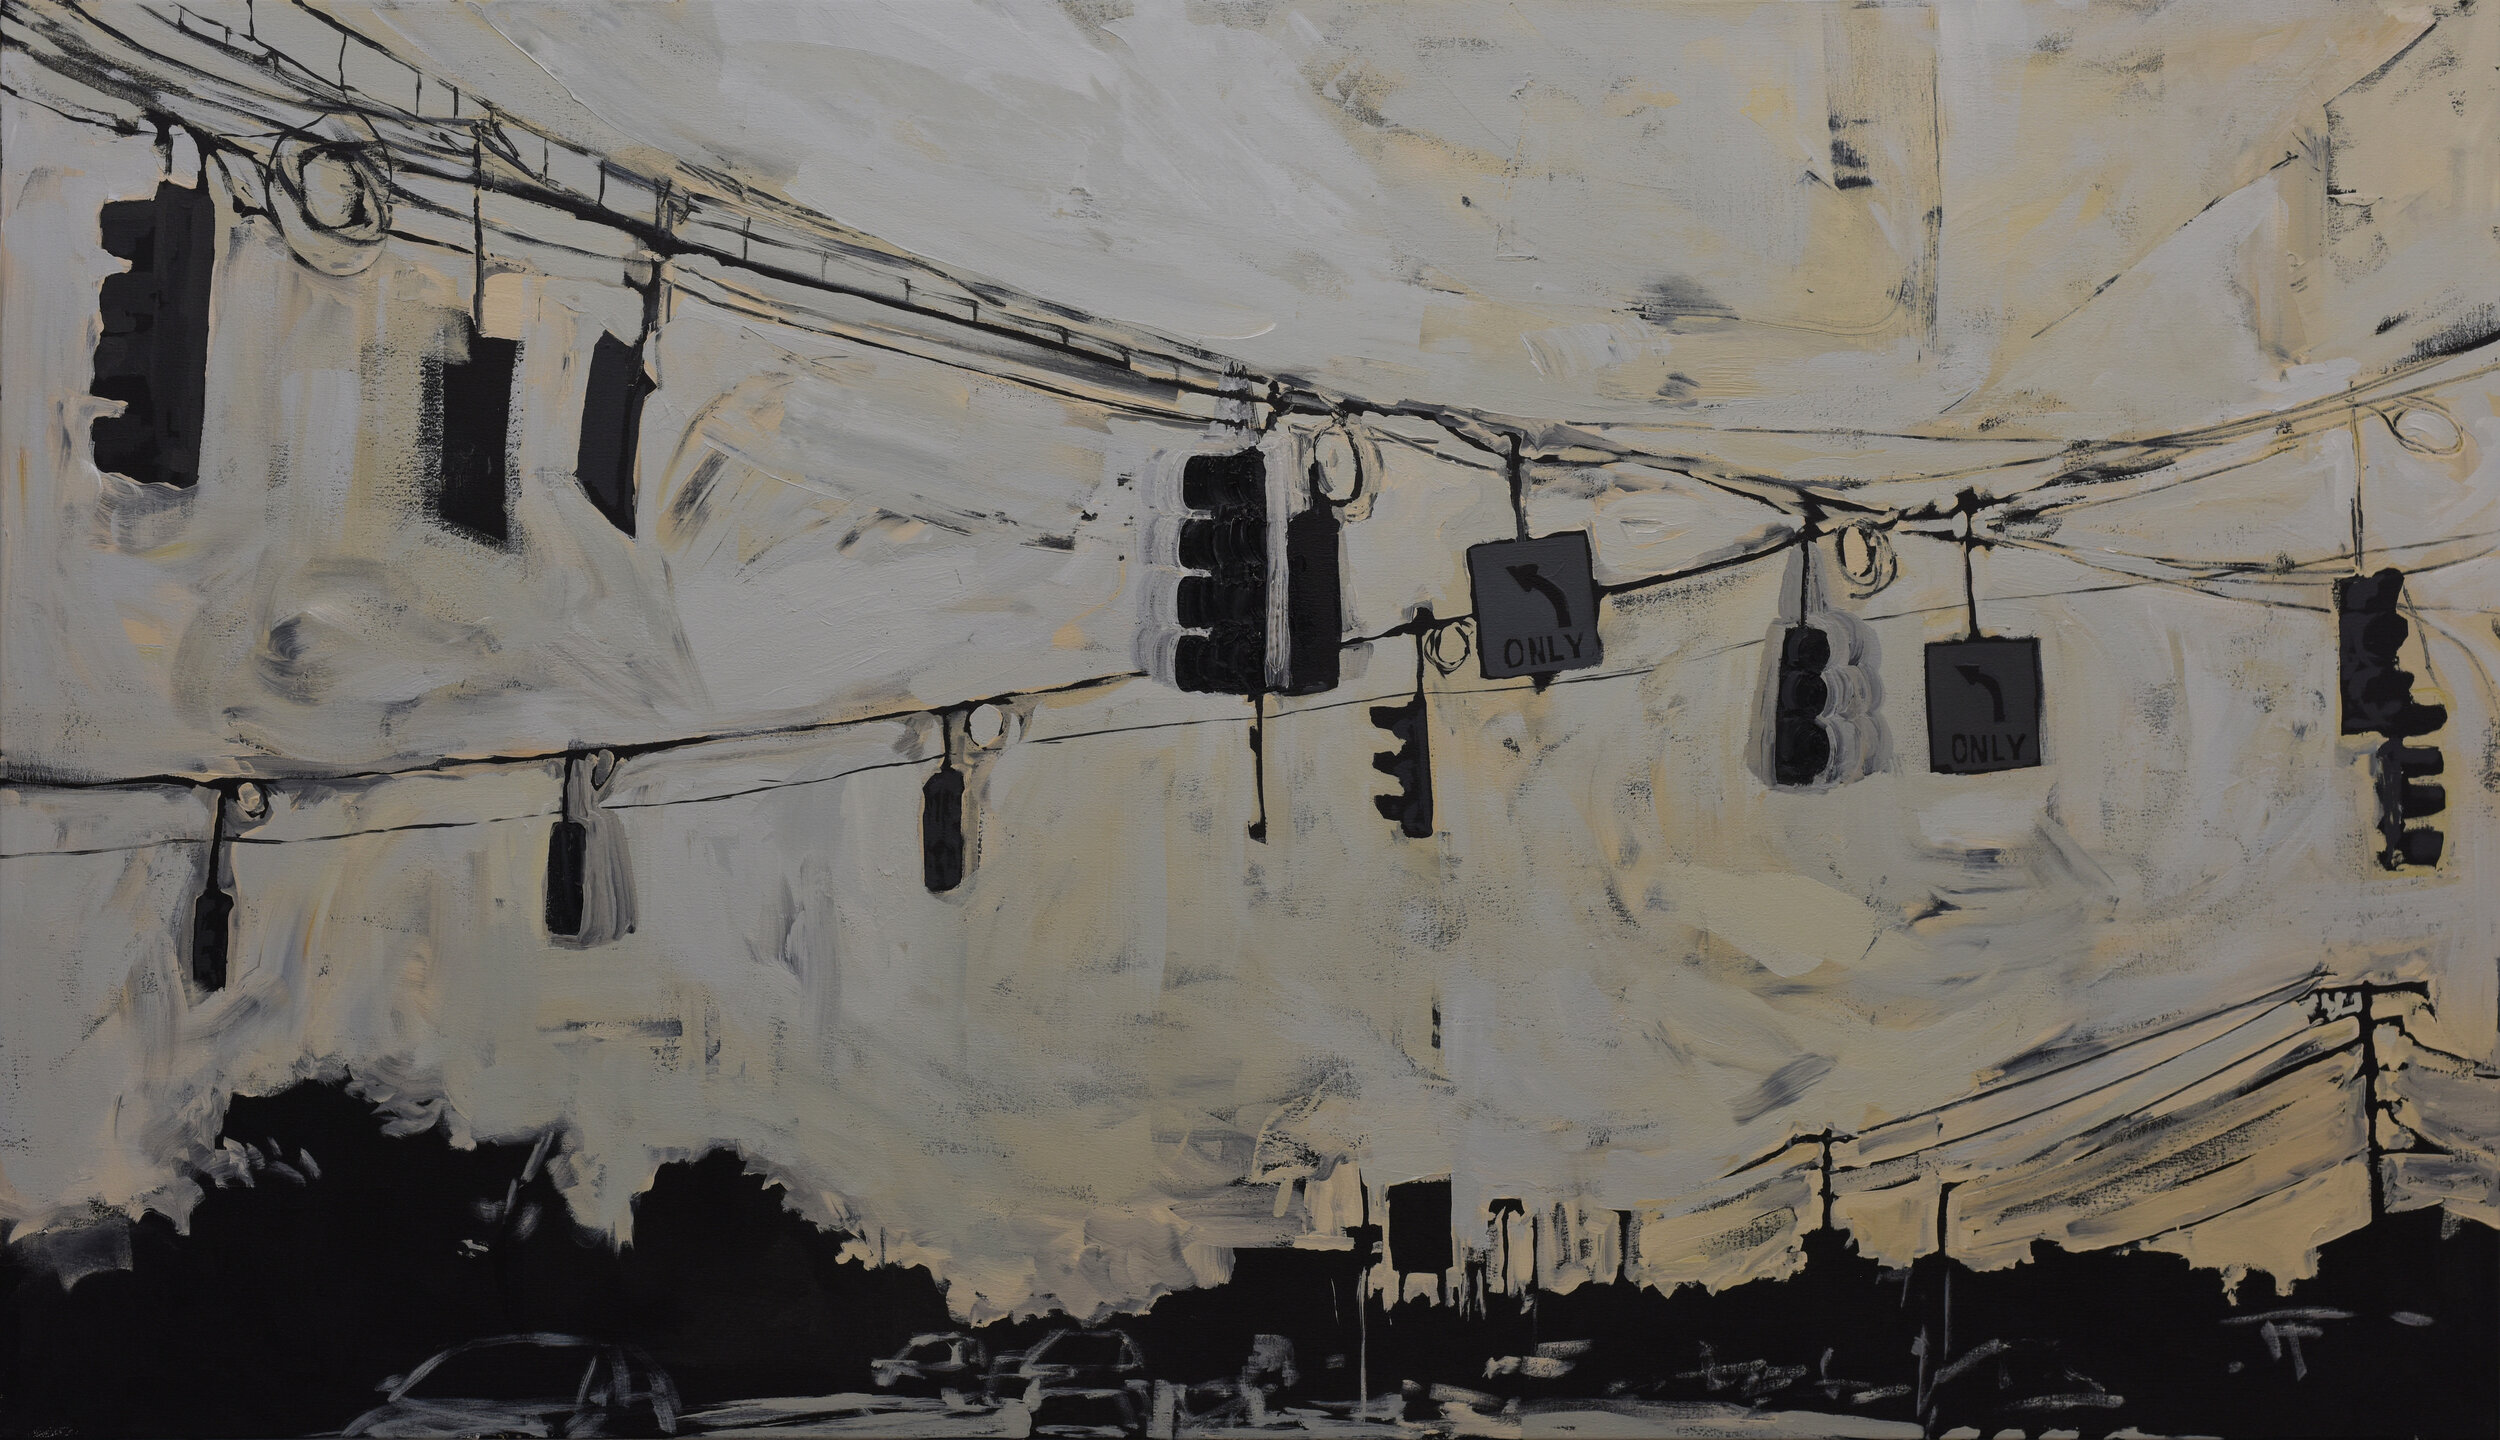  Traffic Lights, acrylic on canvas, 48 x 84 inches, 2019 